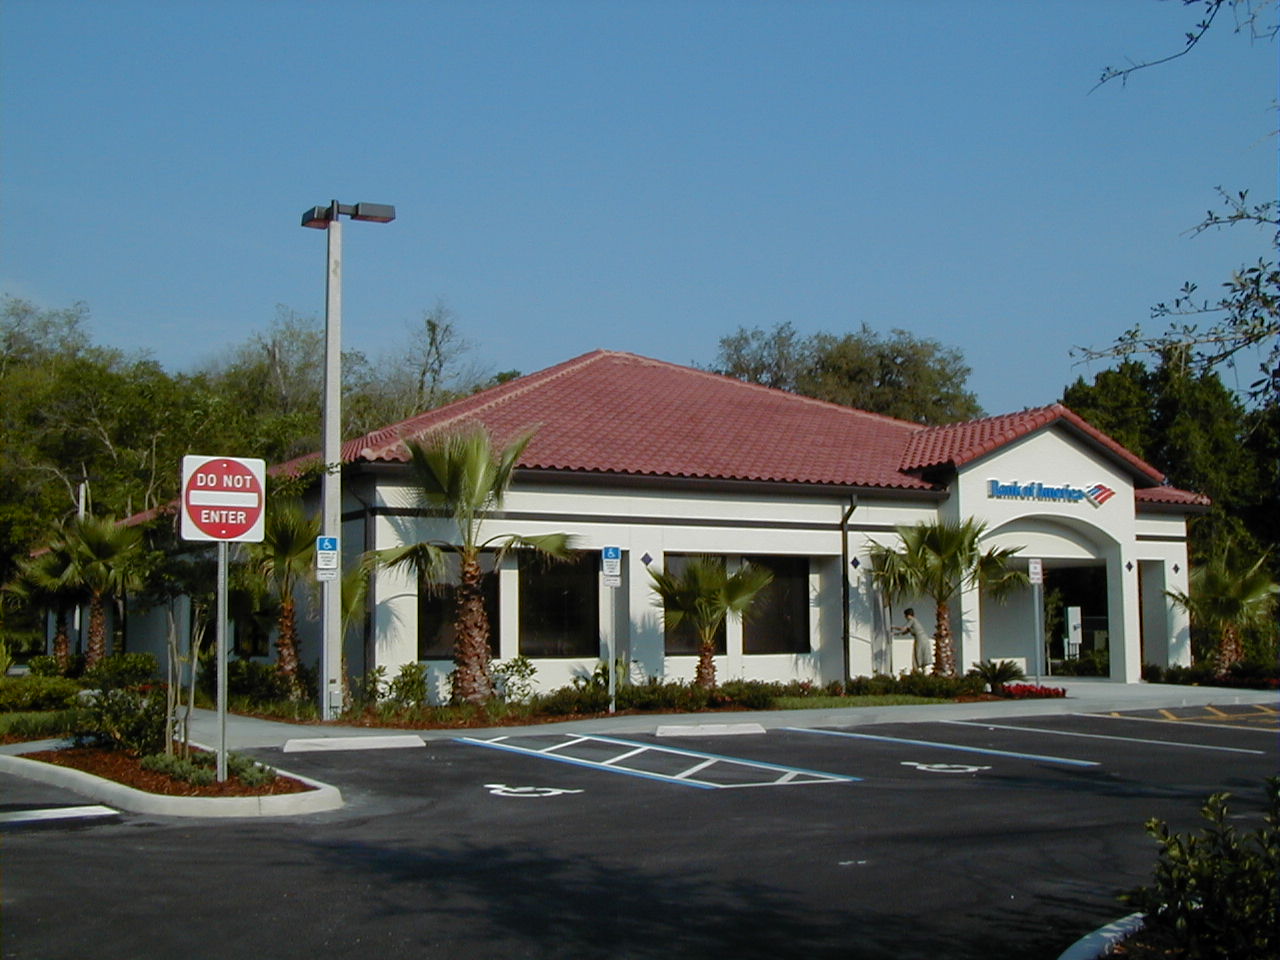 Bank of America Lake Forest